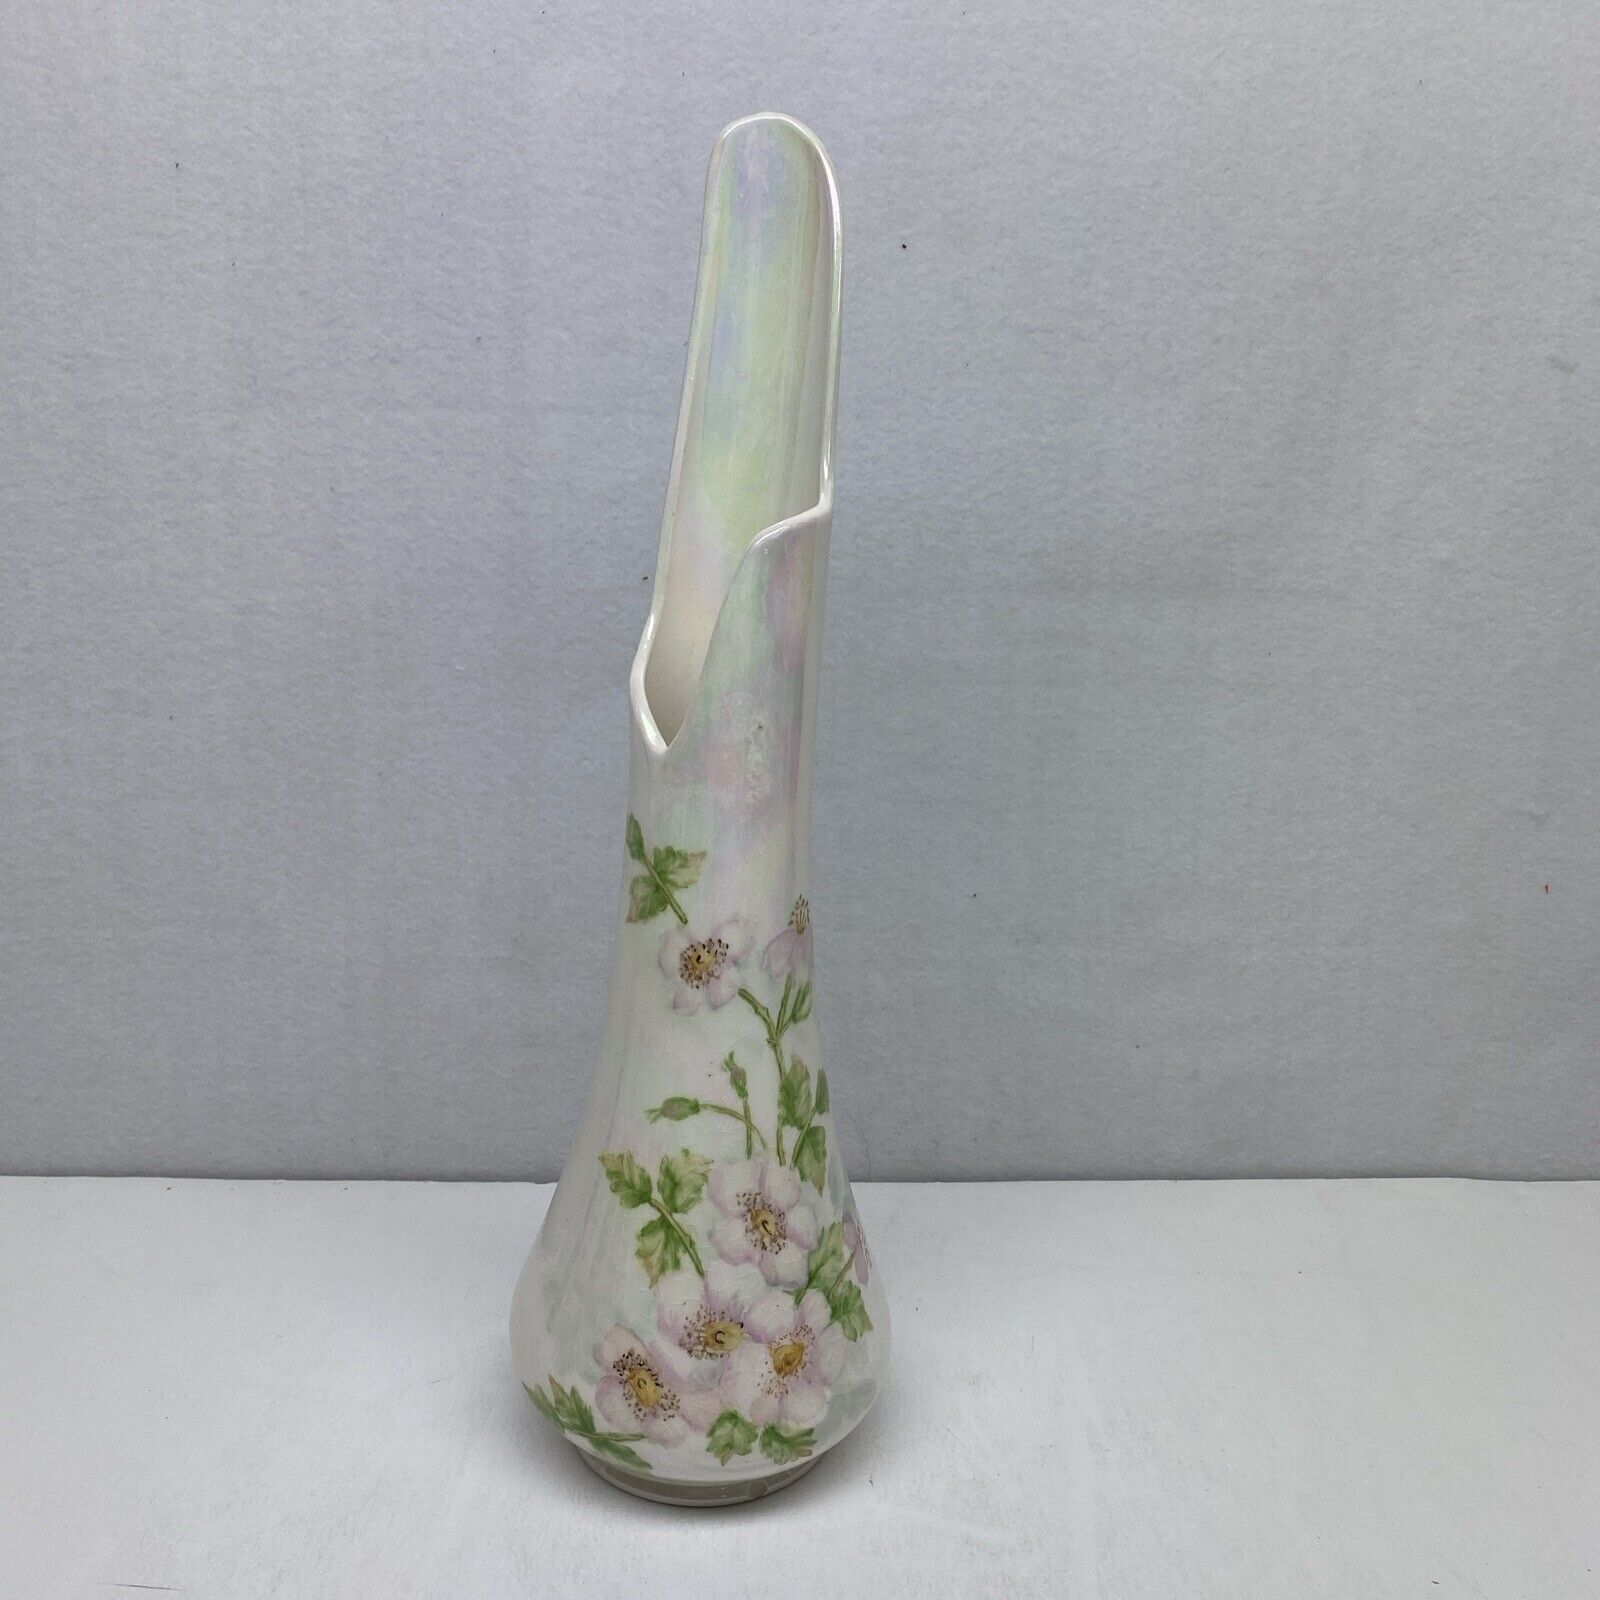 Vintage Ceramic iridescent floral vase. 17 “ tall. About 5 inches wide at Base.